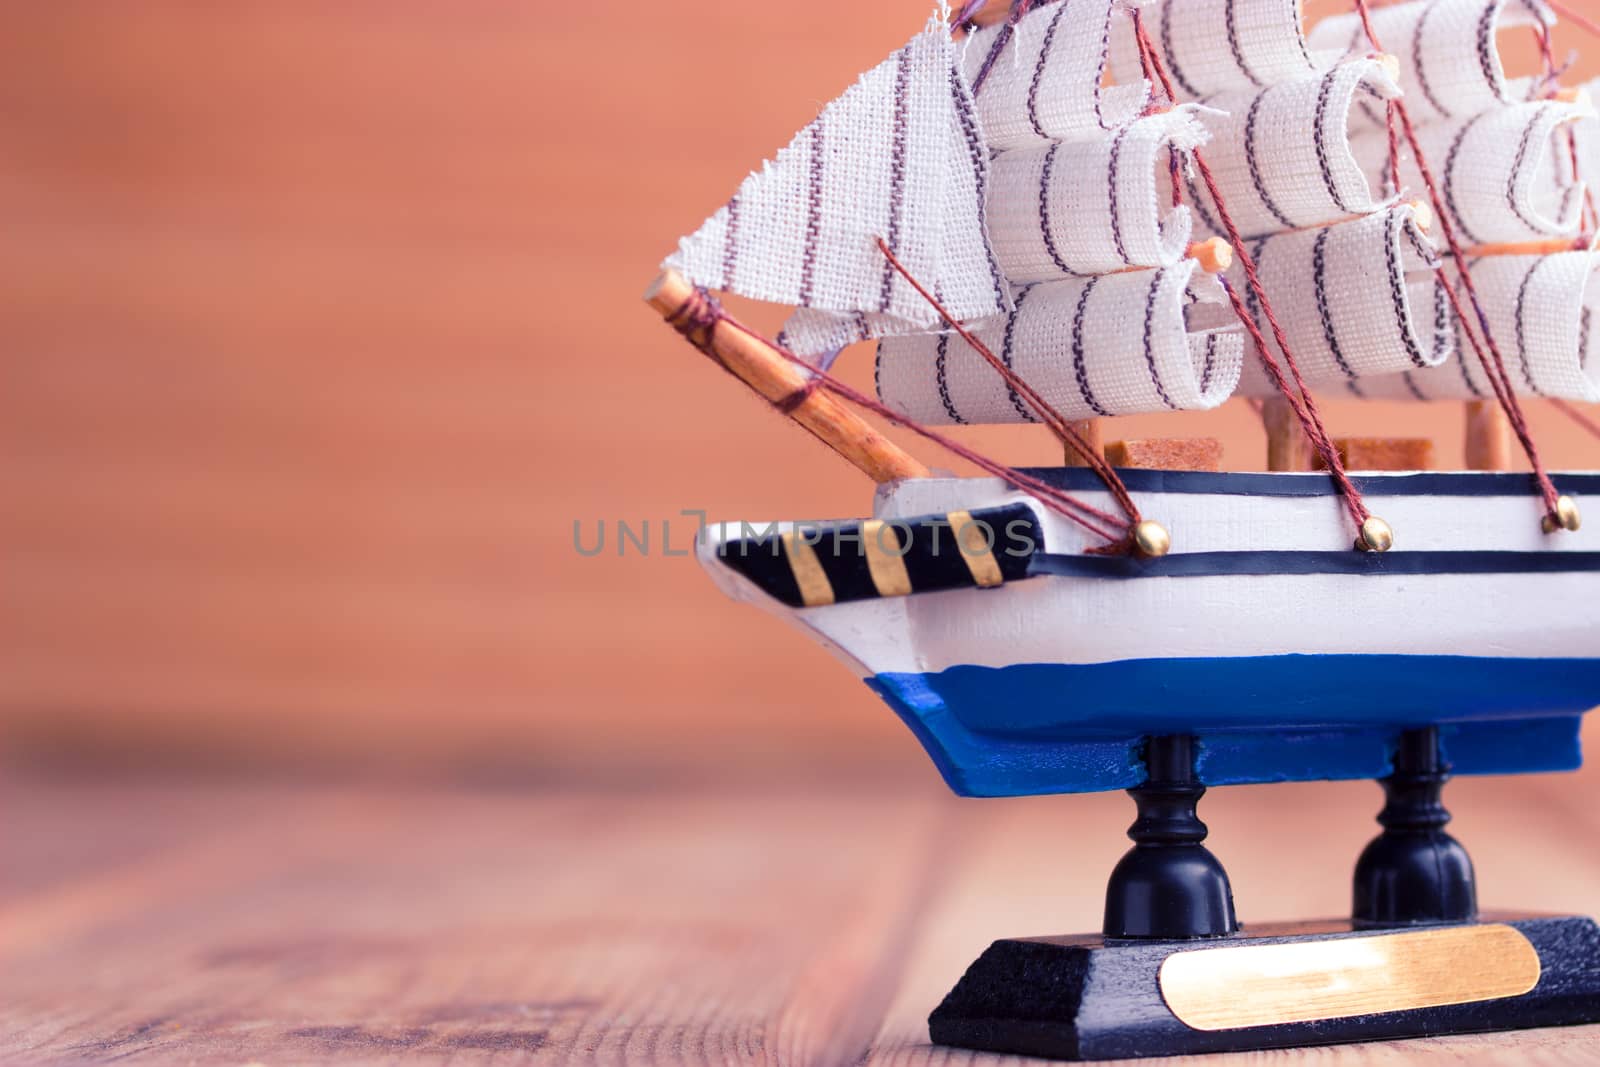 Toy sailboat on a wooden background by liwei12